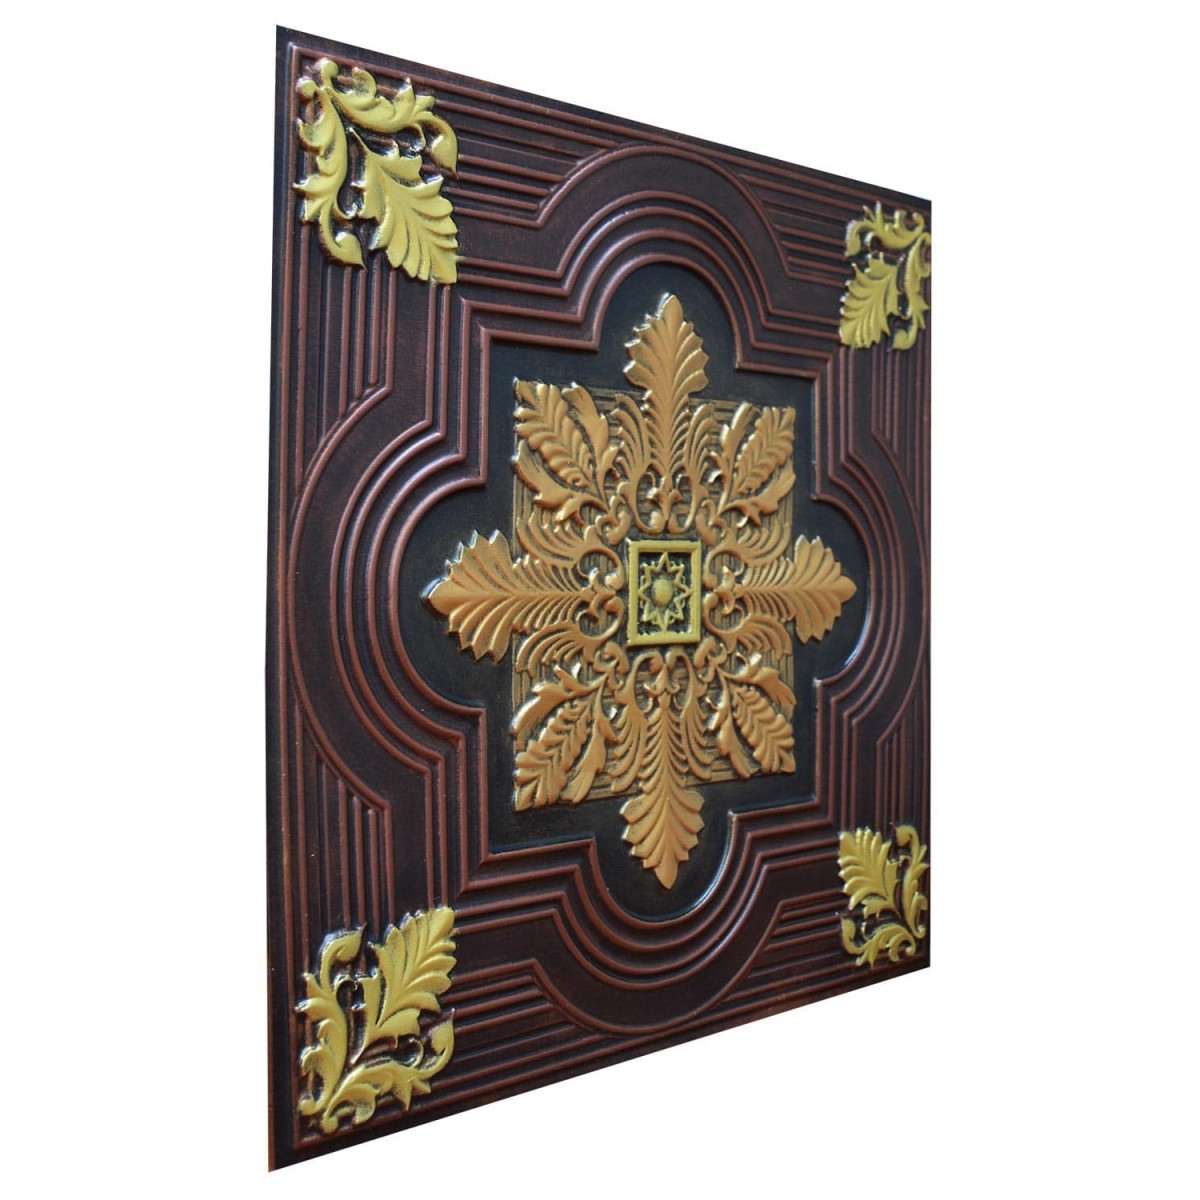 Large Snowflake V - FAD Hand Painted Ceiling Tile - #CTF-003-5